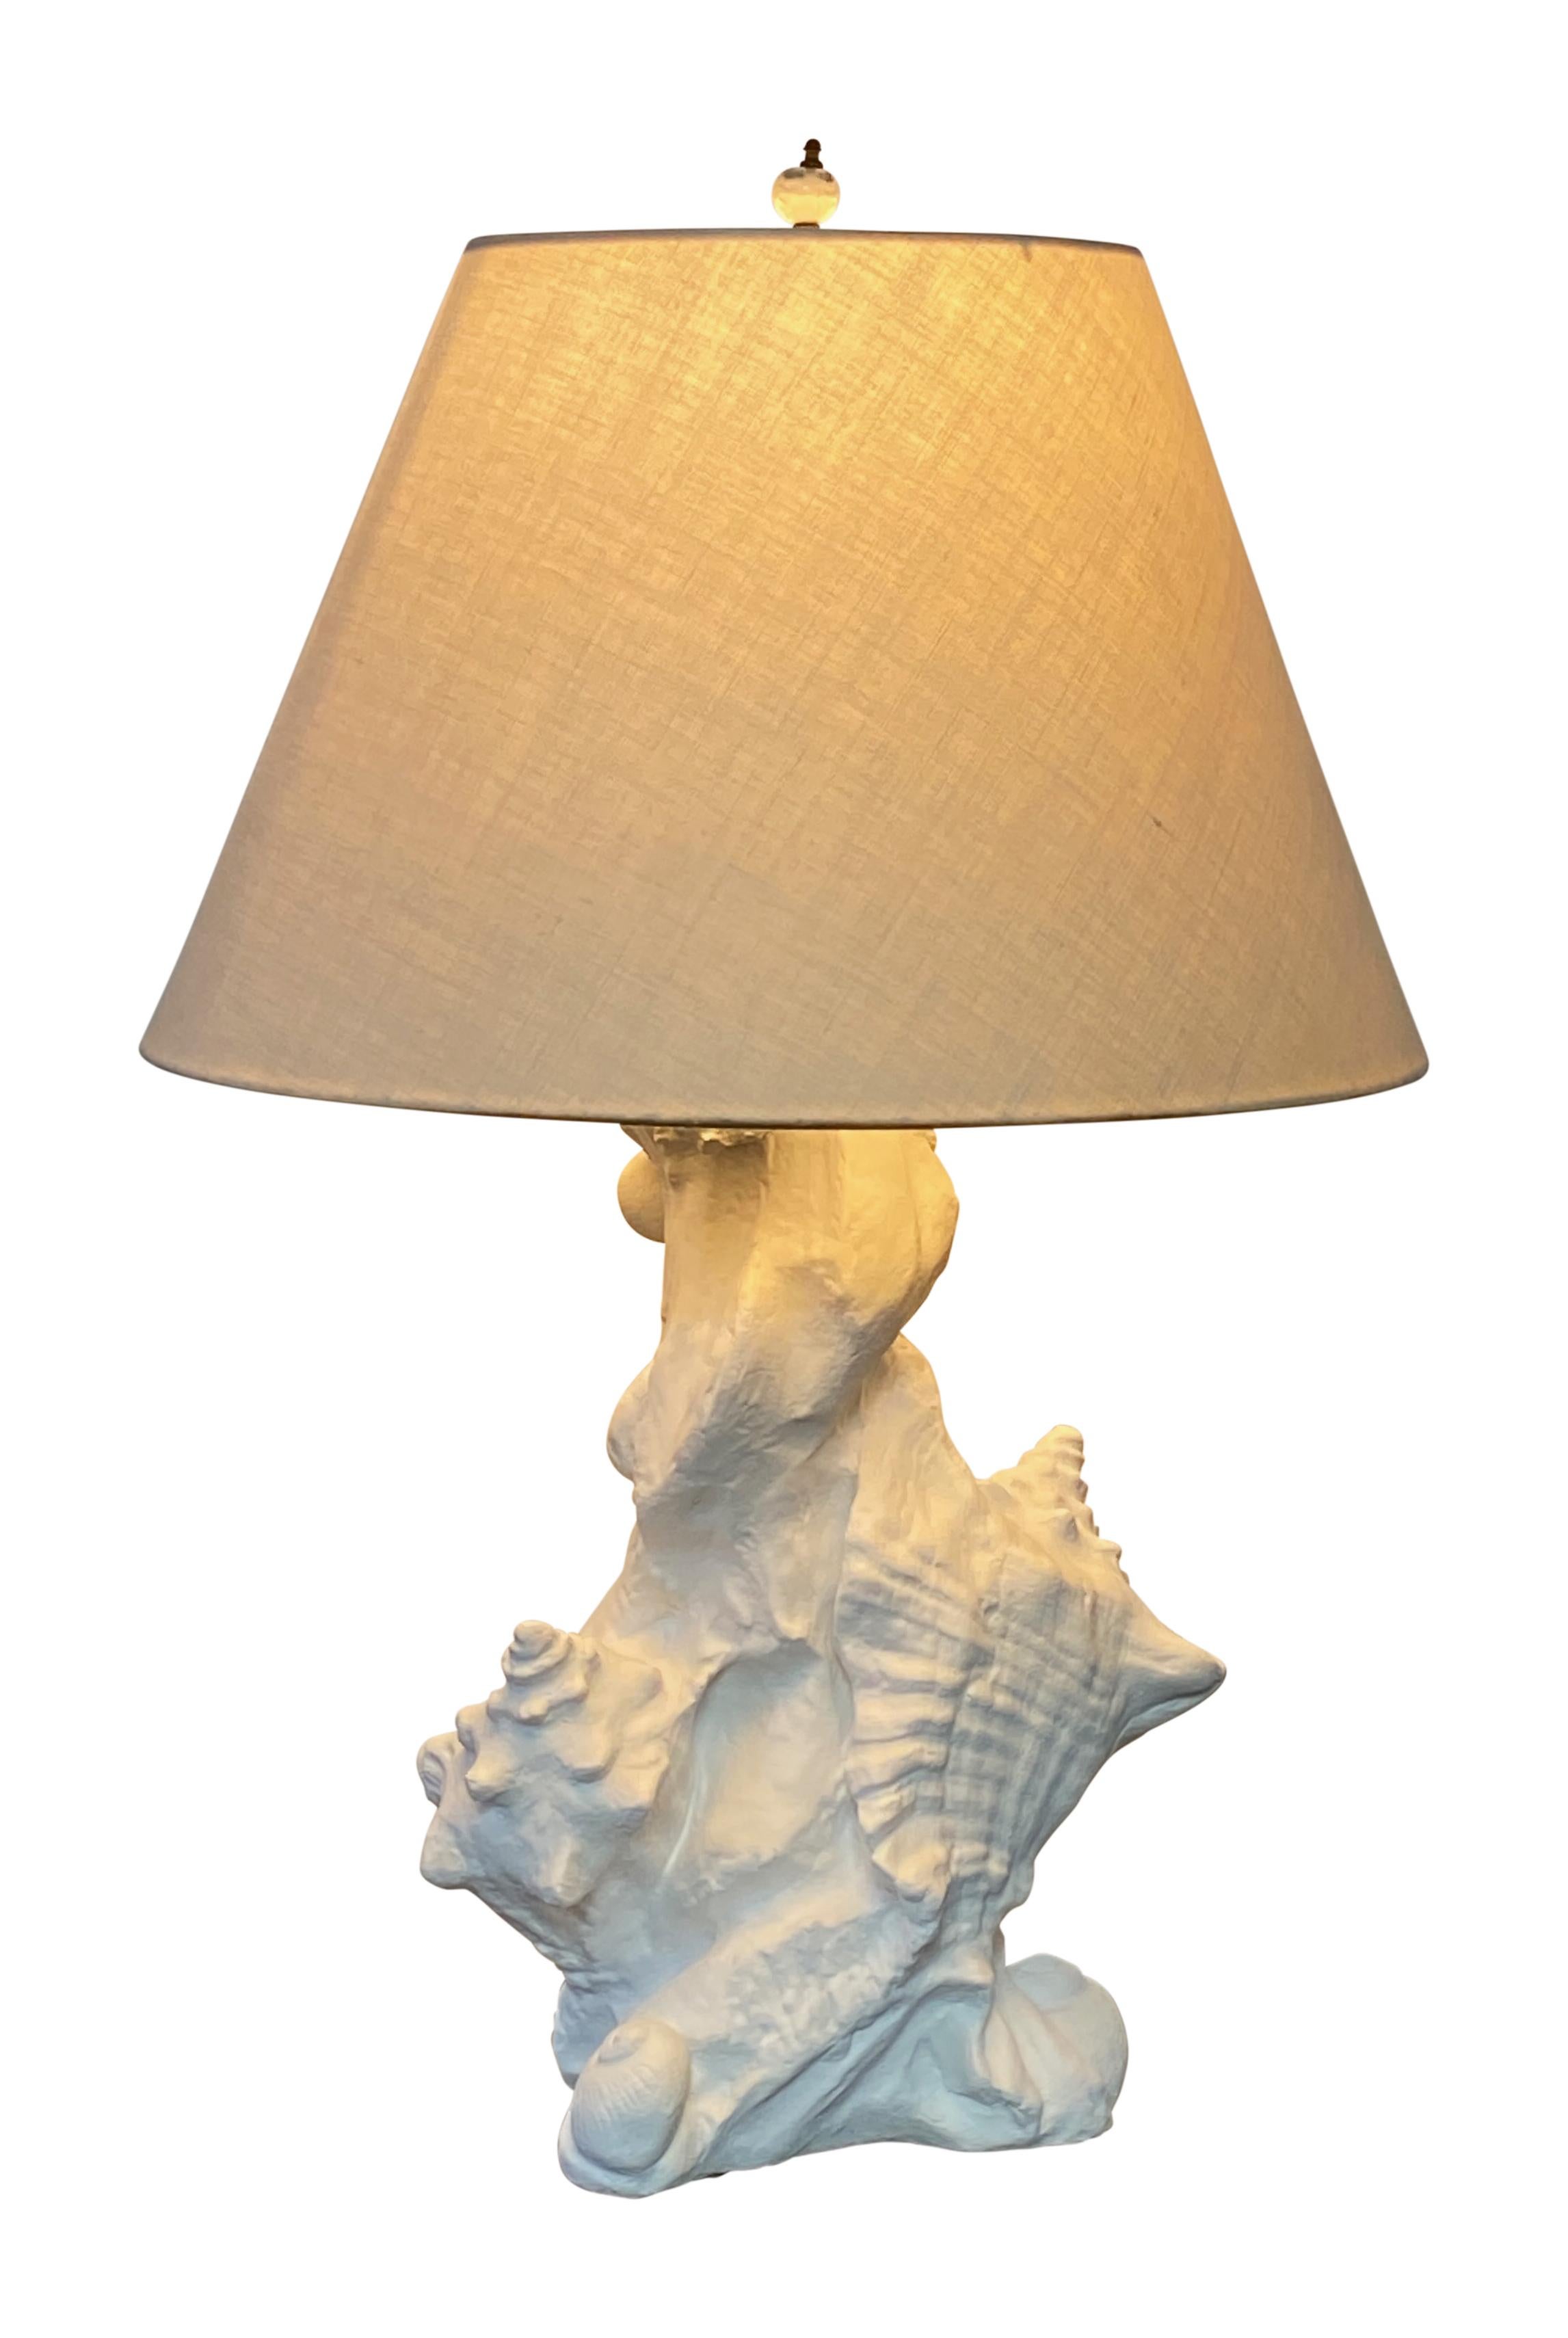 Serge Roche style sculptural seashell table lamp dates to the 1960's. Made of molded plaster composition.
Perfect Coastal or Palm beach look.
In excellent condition.
Recently re-wired.
Shade not included.